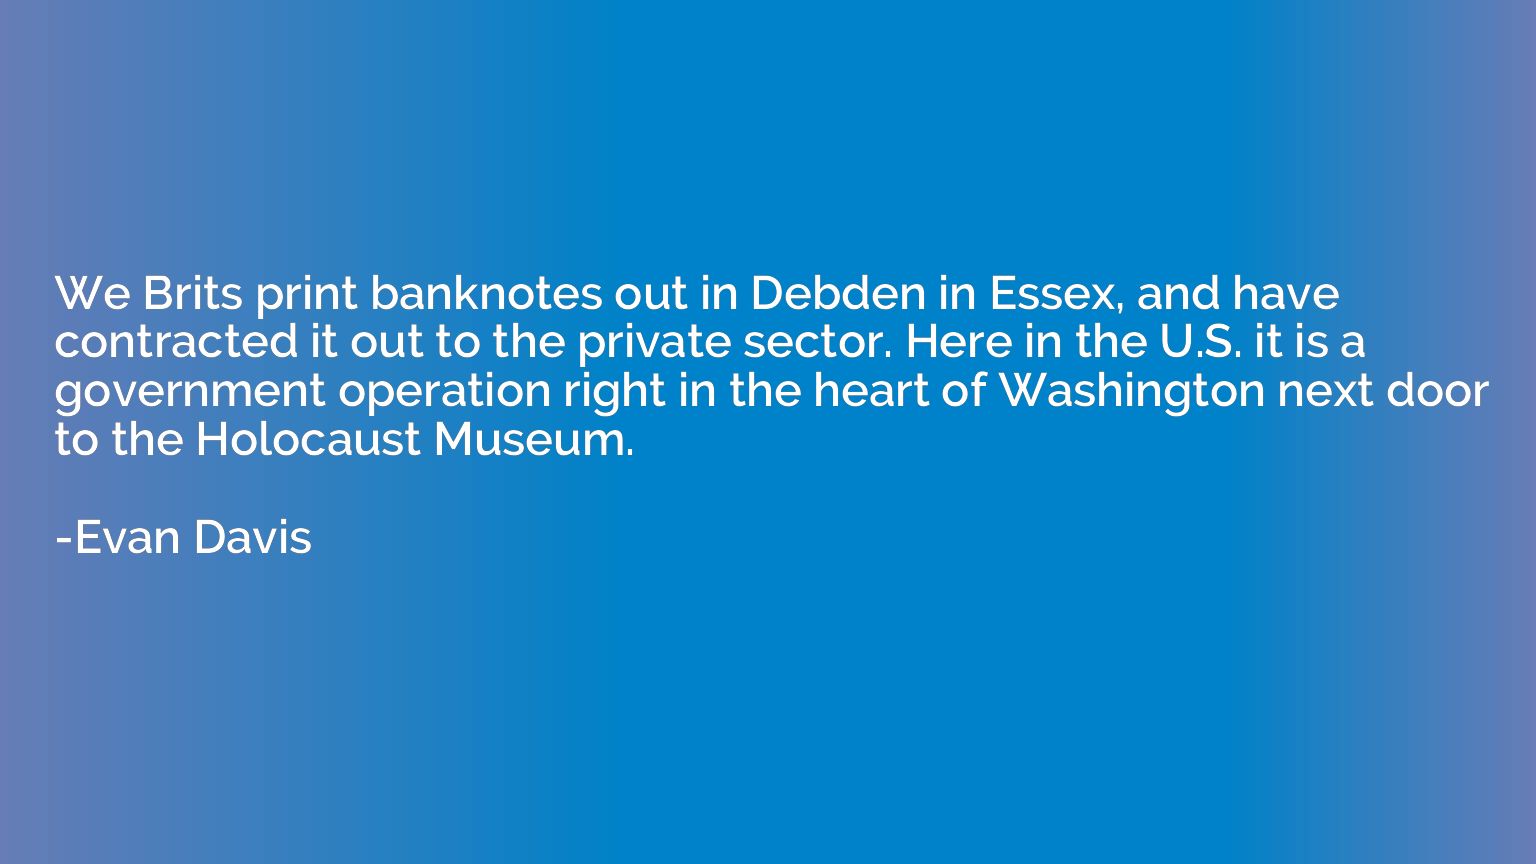 We Brits print banknotes out in Debden in Essex, and have co